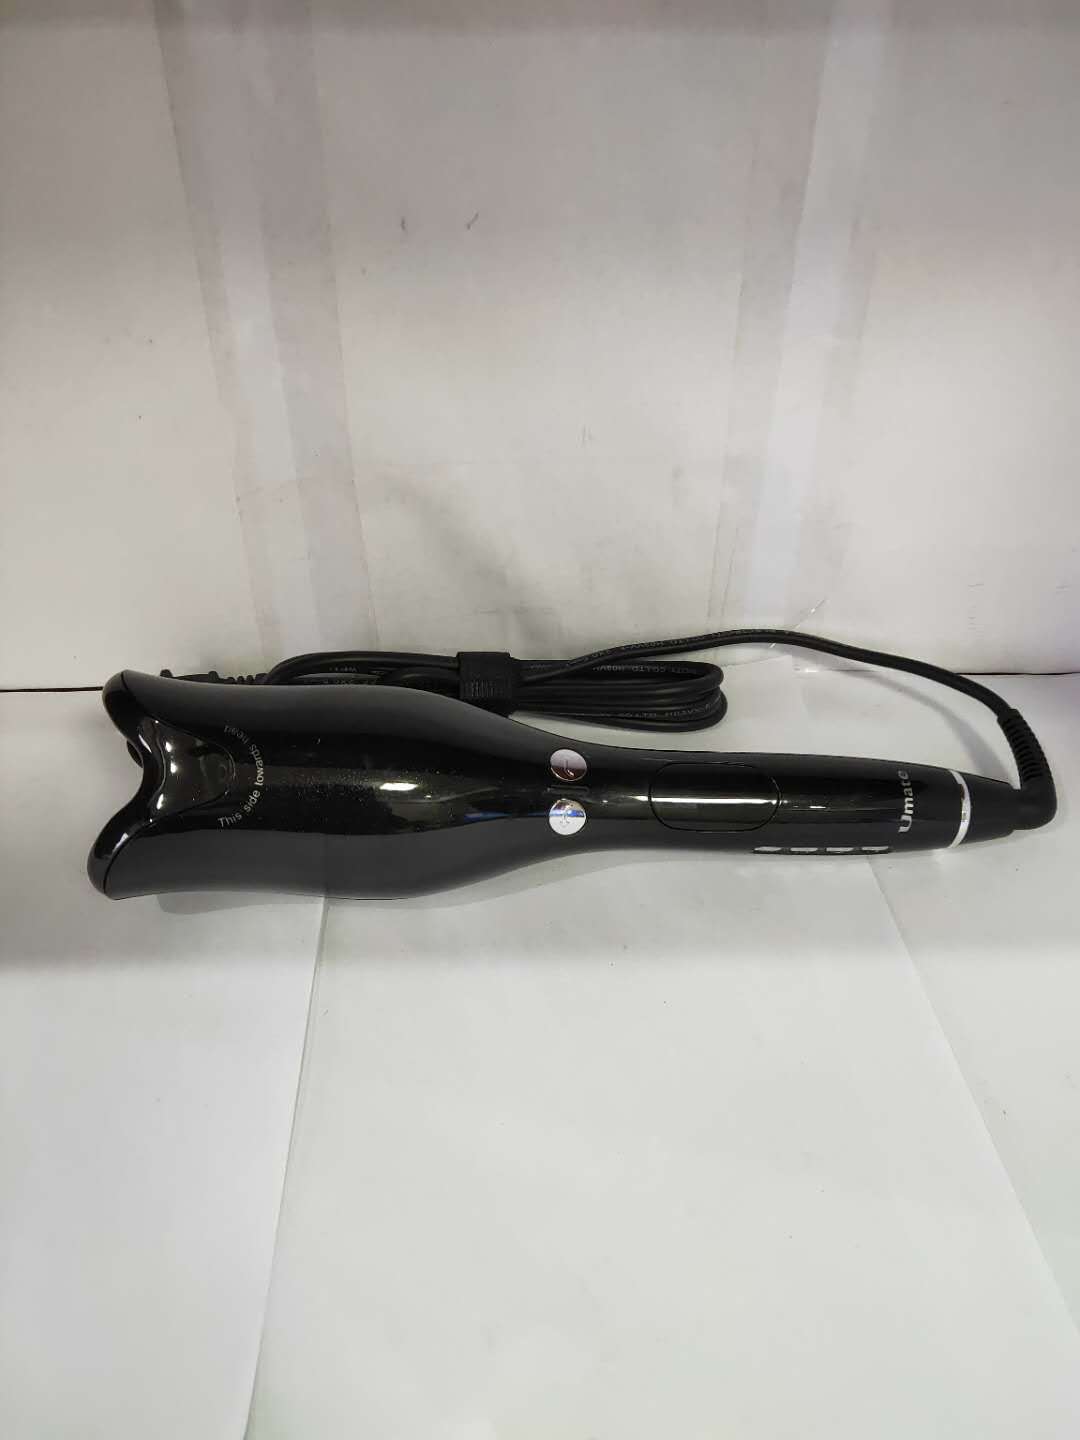 Rose-shaped Curling Iron Automatic Infrared Heating Multi-function LCD Curling Iron